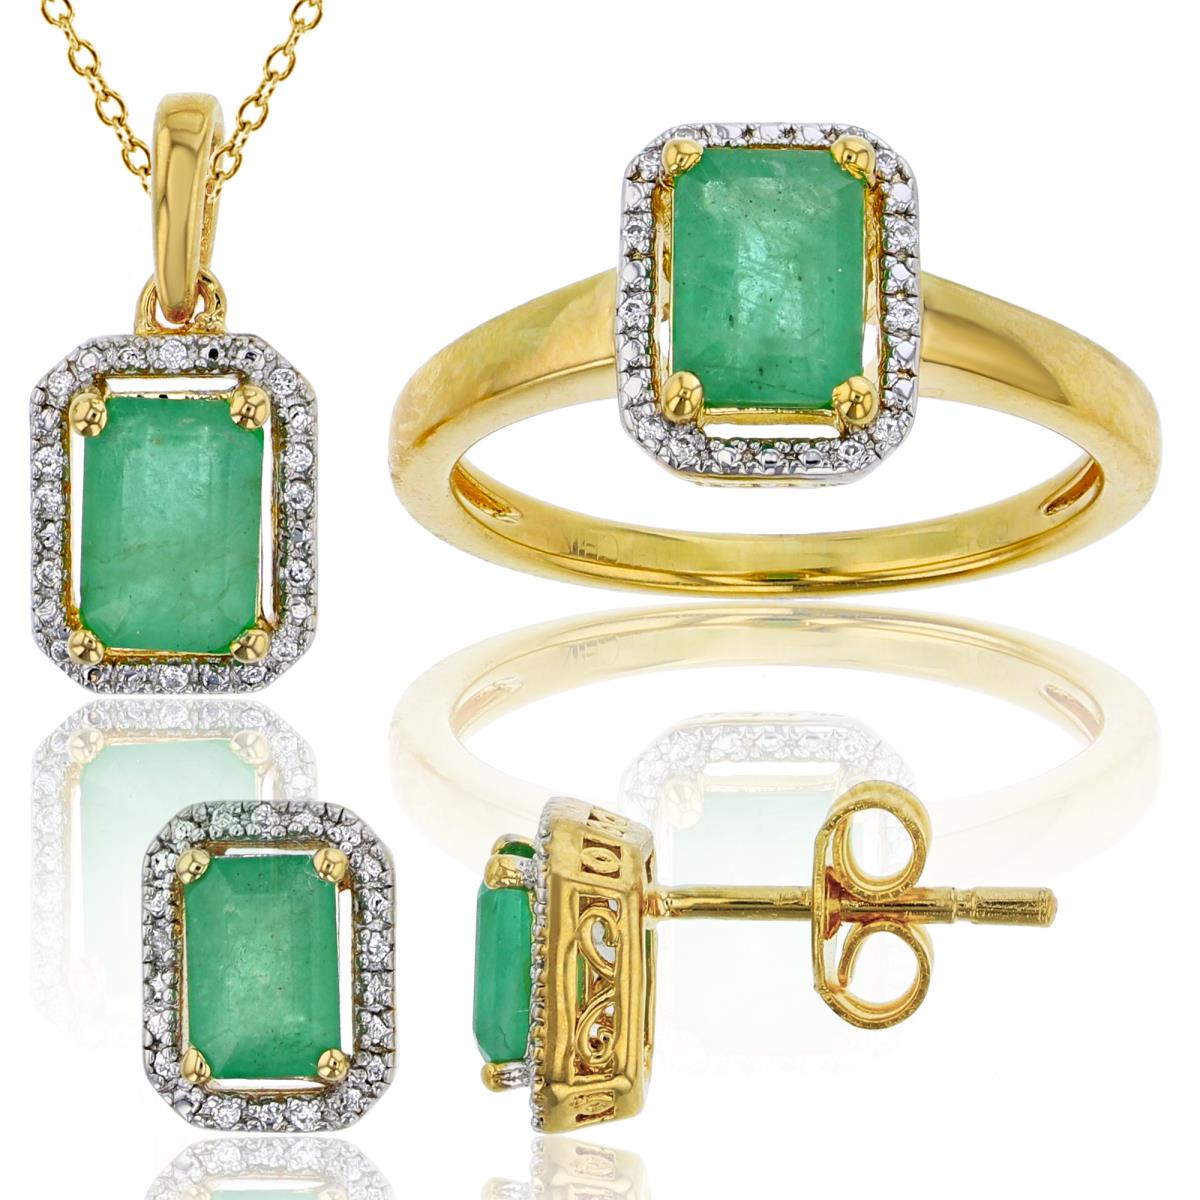 Sterling Silver 1Micron 14ky Gold Plating 0.10 CTTW Rnd Diamonds & Octag Emerald Ring/Earring/Necklace Halo Set